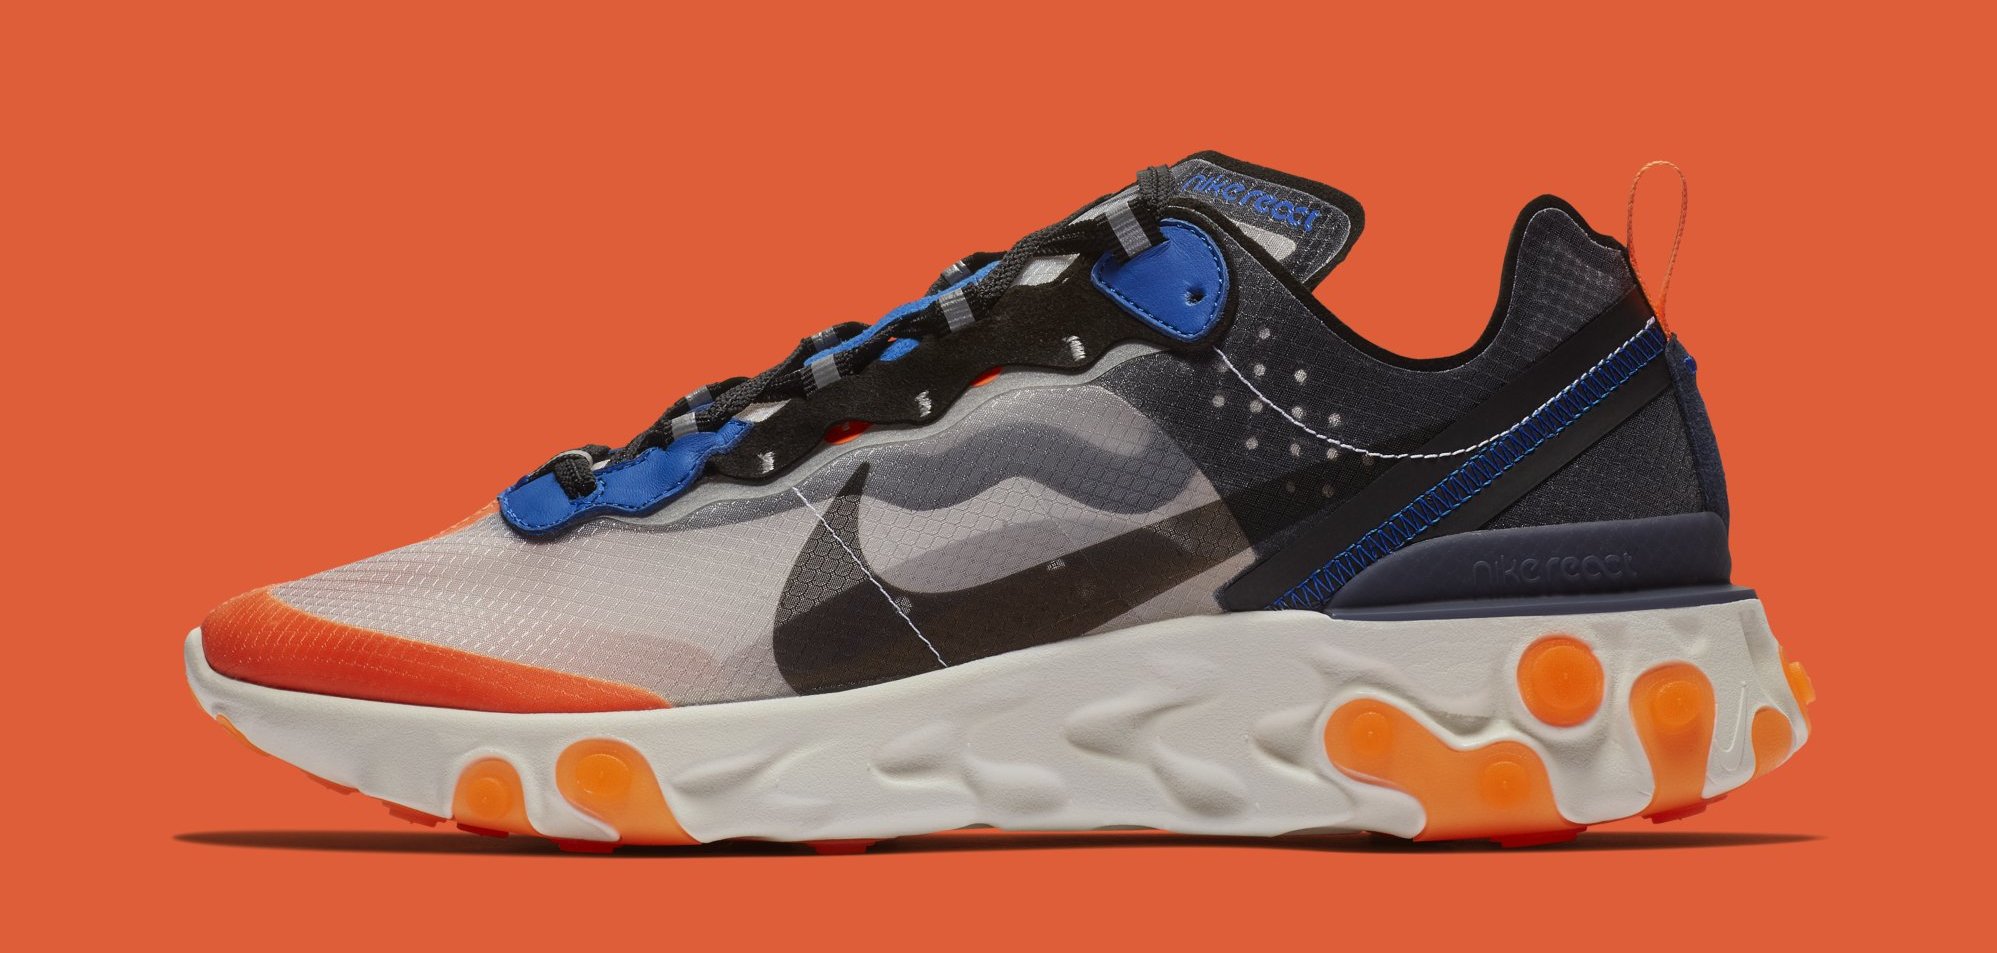 Nike React Element 87 AQ1090 004 (Lateral)